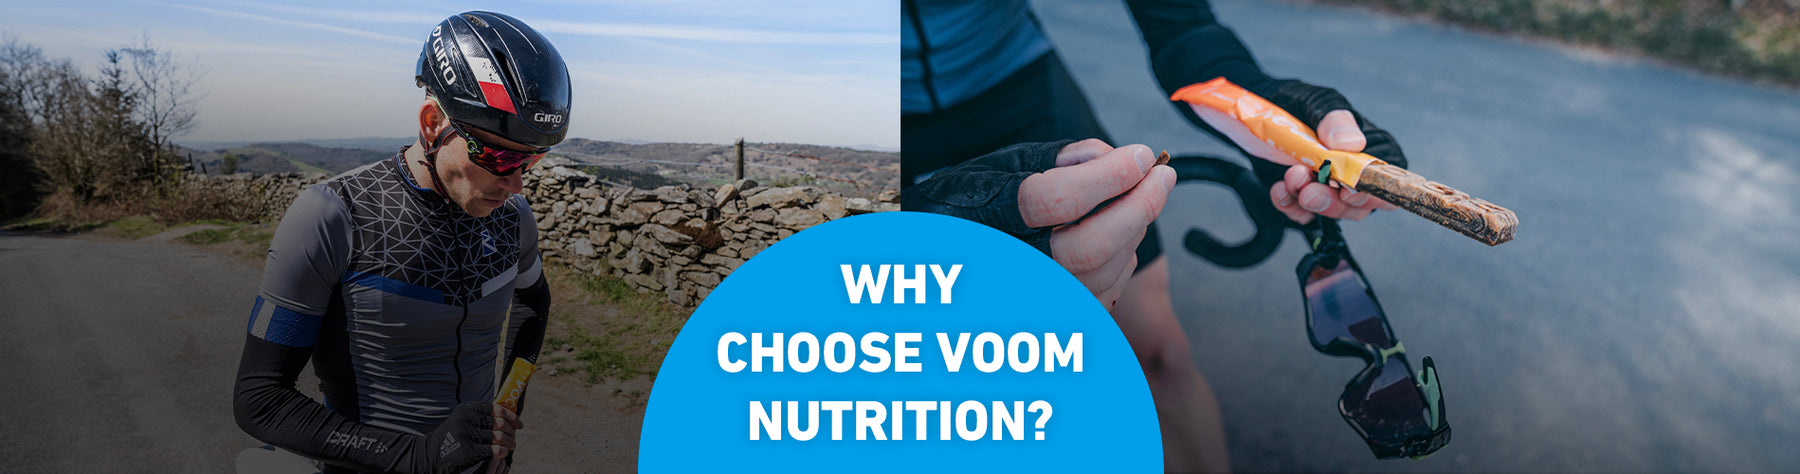 Why Choose VOOM Nutrition?